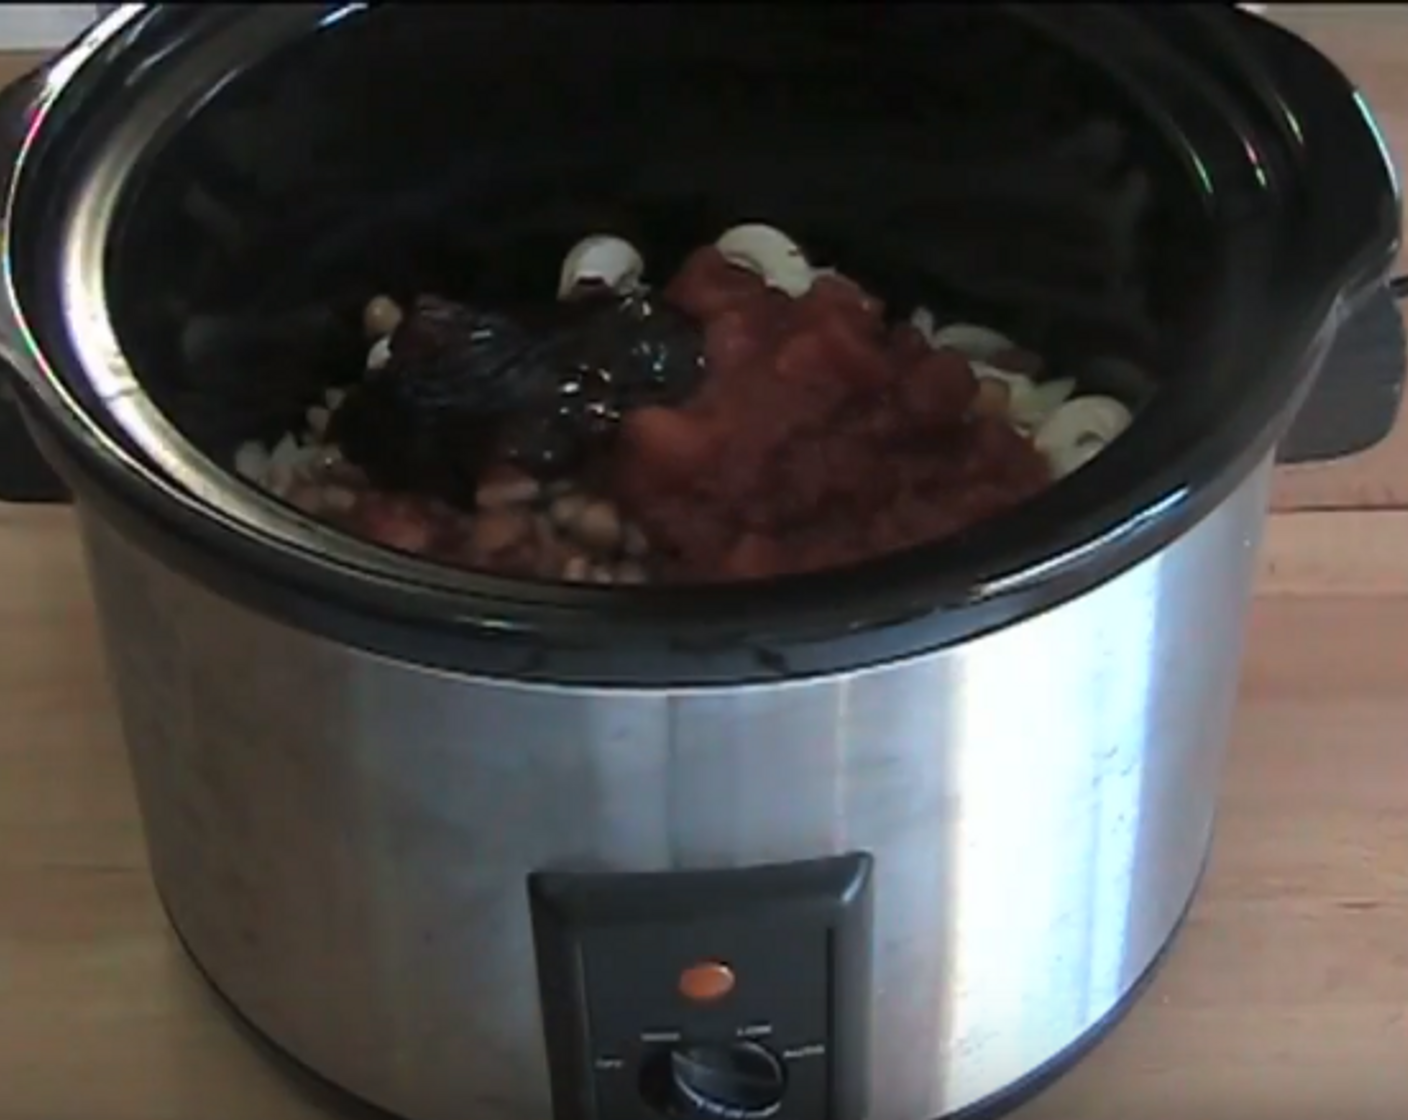 step 1 To start, brown Sausages (8) in a frying pan. Add browned sausage bits to the slow cooker. Add Bacon (2 slices), Button Mushrooms (8), Yellow Onion (1), Canned Three Bean Mix (1 3/4 cups), Canned Diced Tomatoes (1 3/4 cups), and Barbecue Sauce (2 Tbsp).